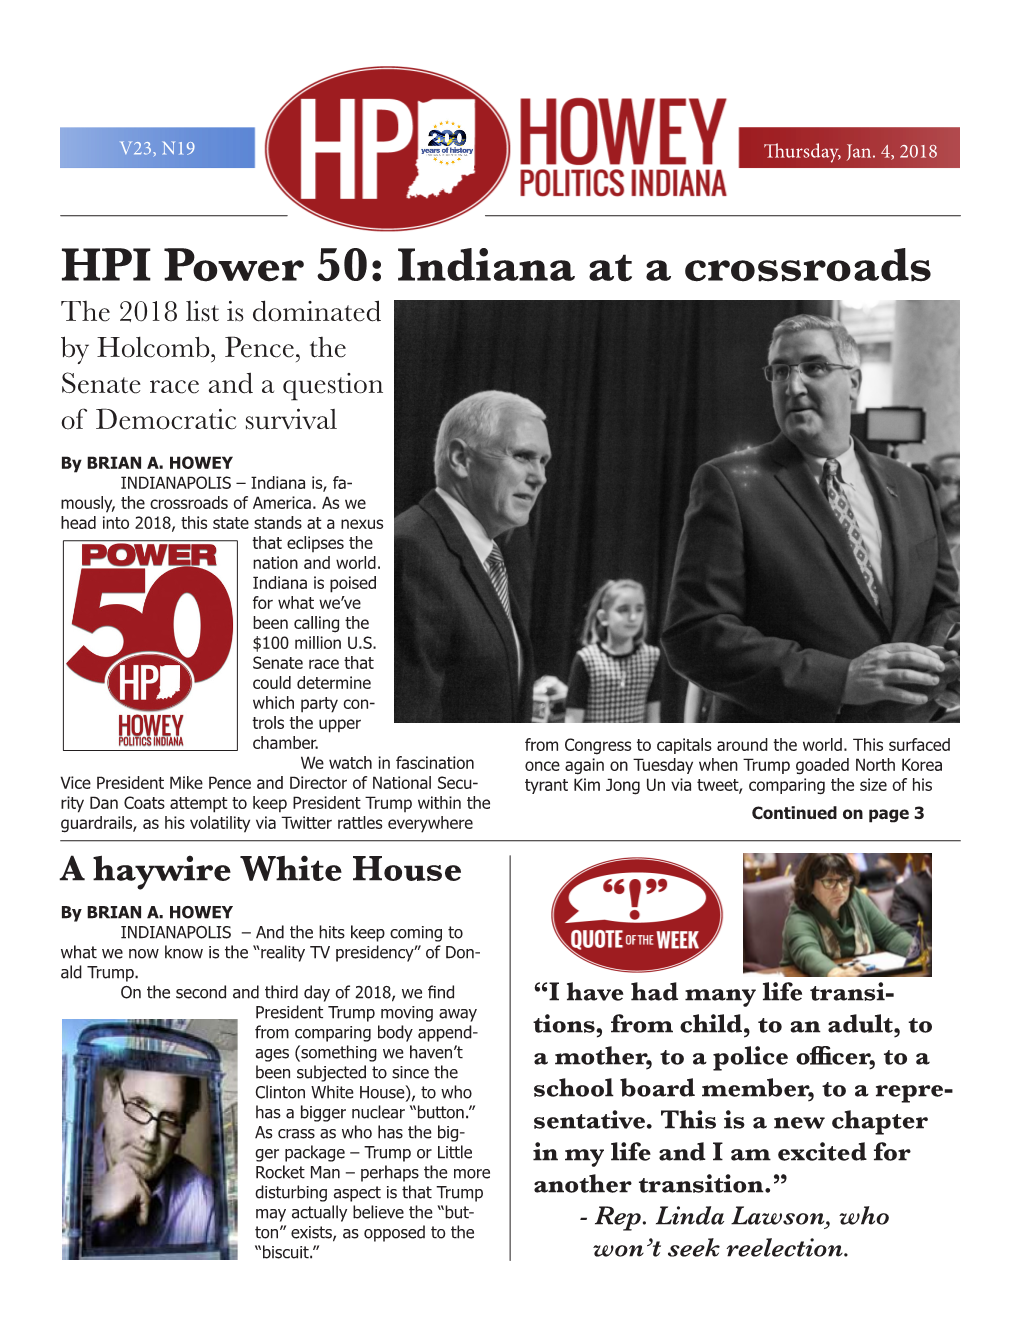 HPI Power 50: Indiana at a Crossroads the 2018 List Is Dominated by Holcomb, Pence, the Senate Race and a Question of Democratic Survival by BRIAN A